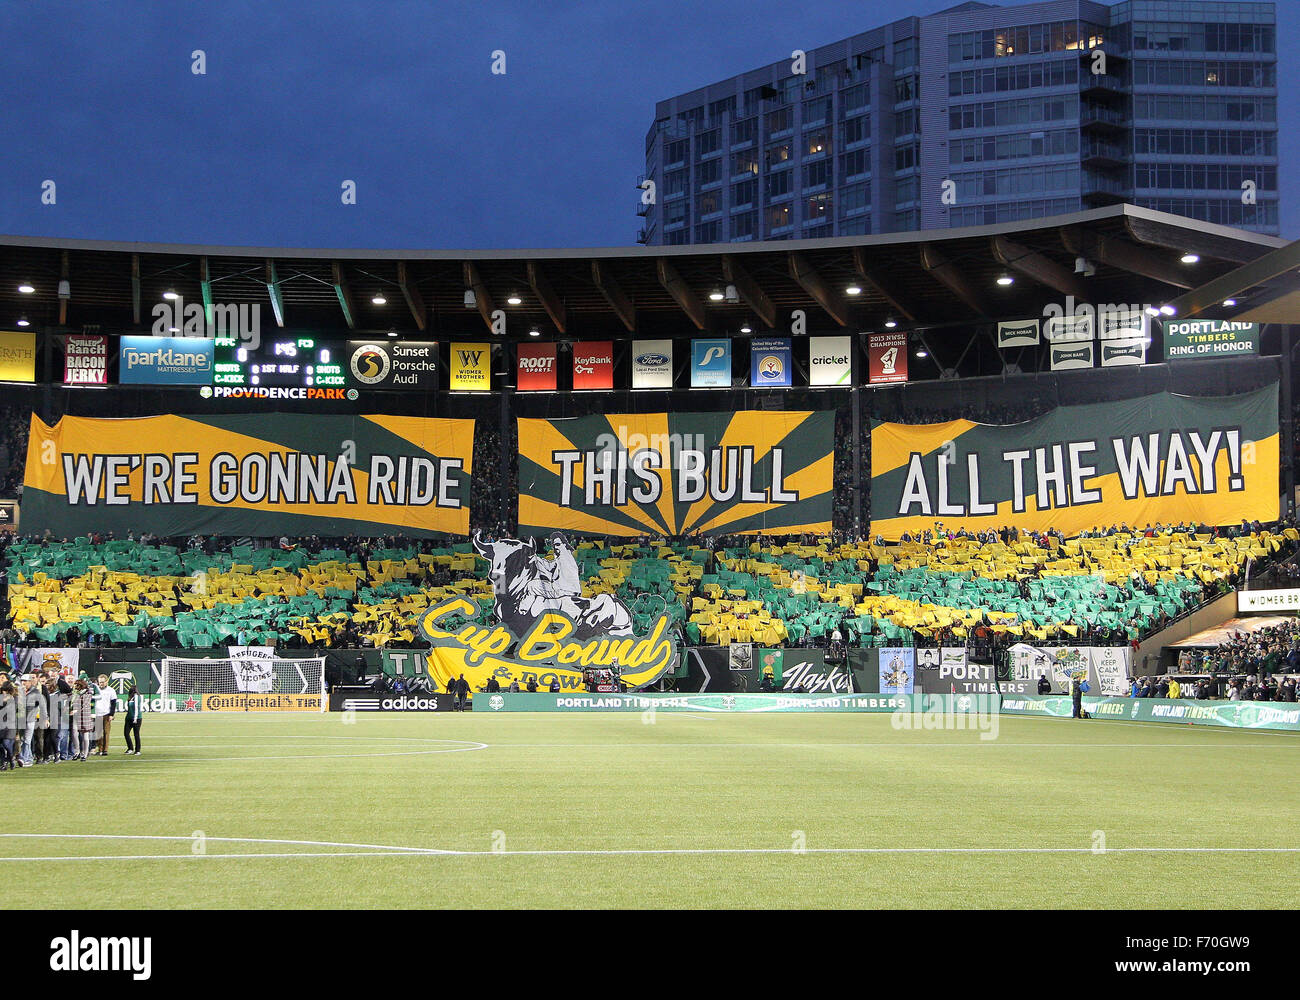 Providence Park, Portland, OR, USA. 22nd Nov, 2015. Timbers fans display their tifo prior to the opening 2015 MLS Playoff match between visiting FC Dallas and the Portland Timbers at Providence Park, Portland, OR. Larry C. Lawson/CSM/Alamy Live News Stock Photo